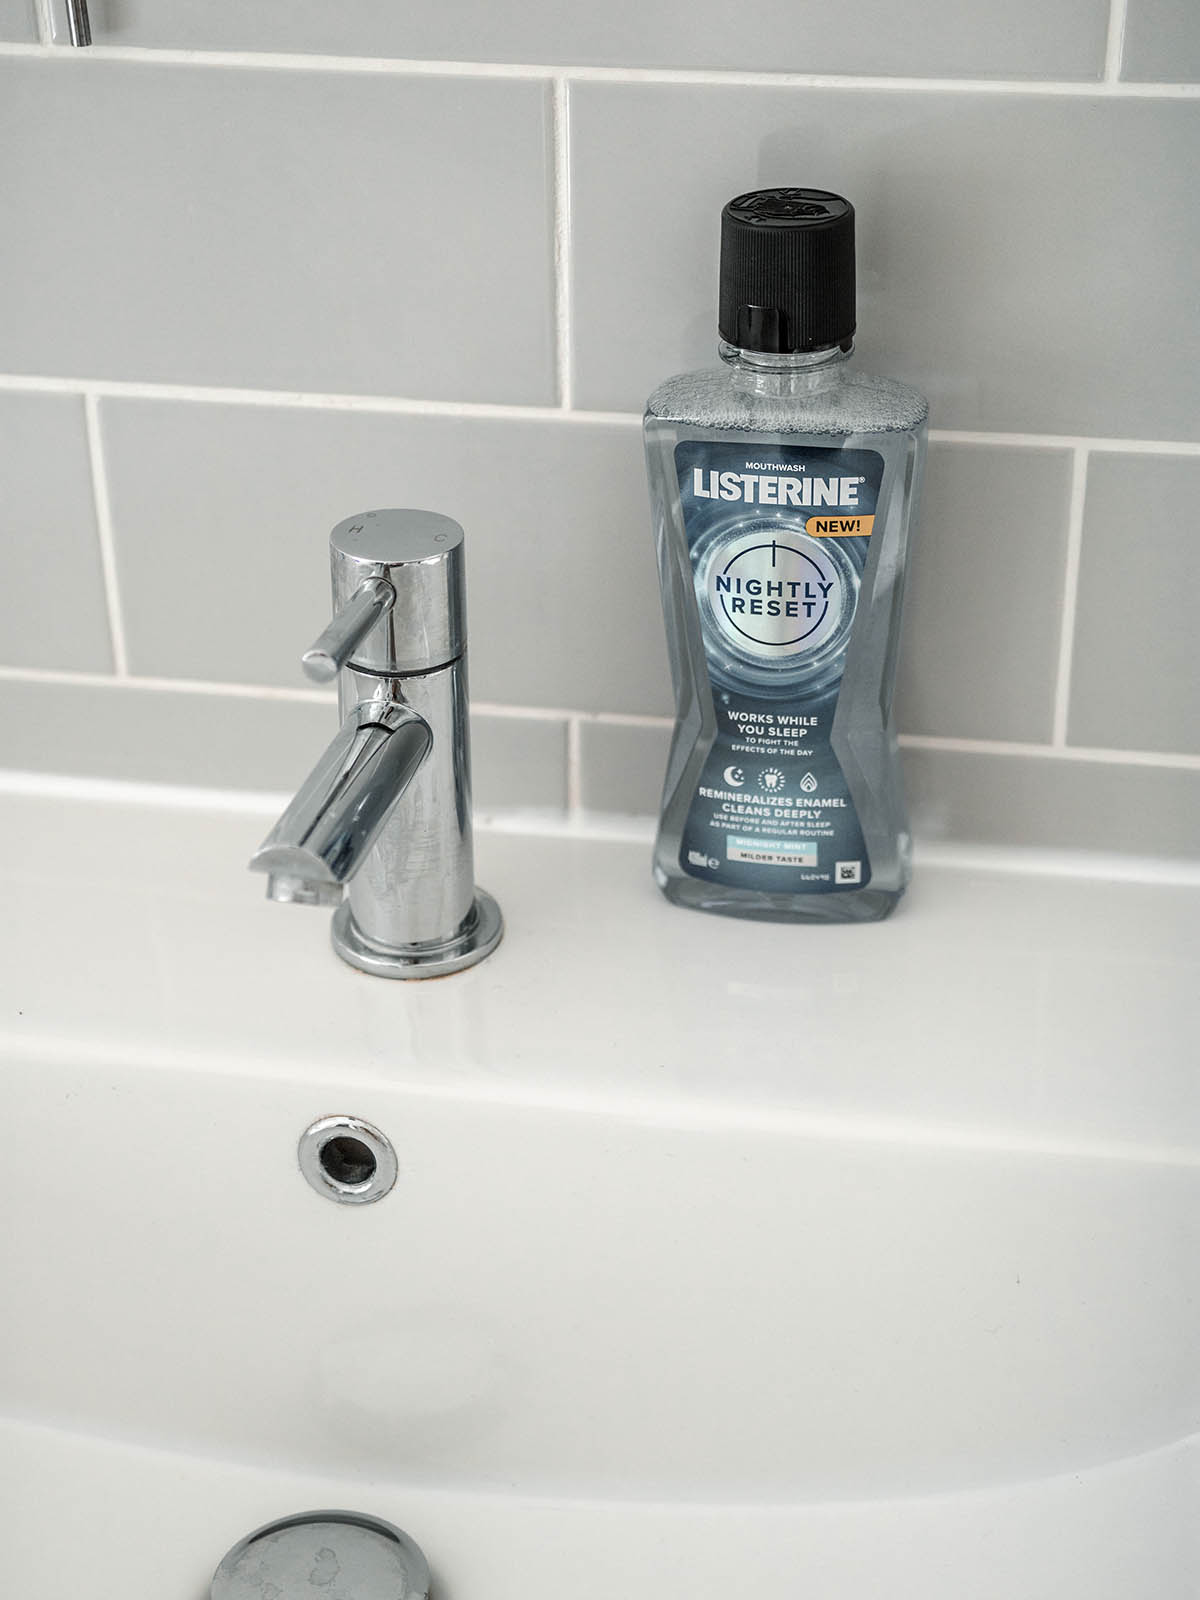 Listerine Nightly Reset Review